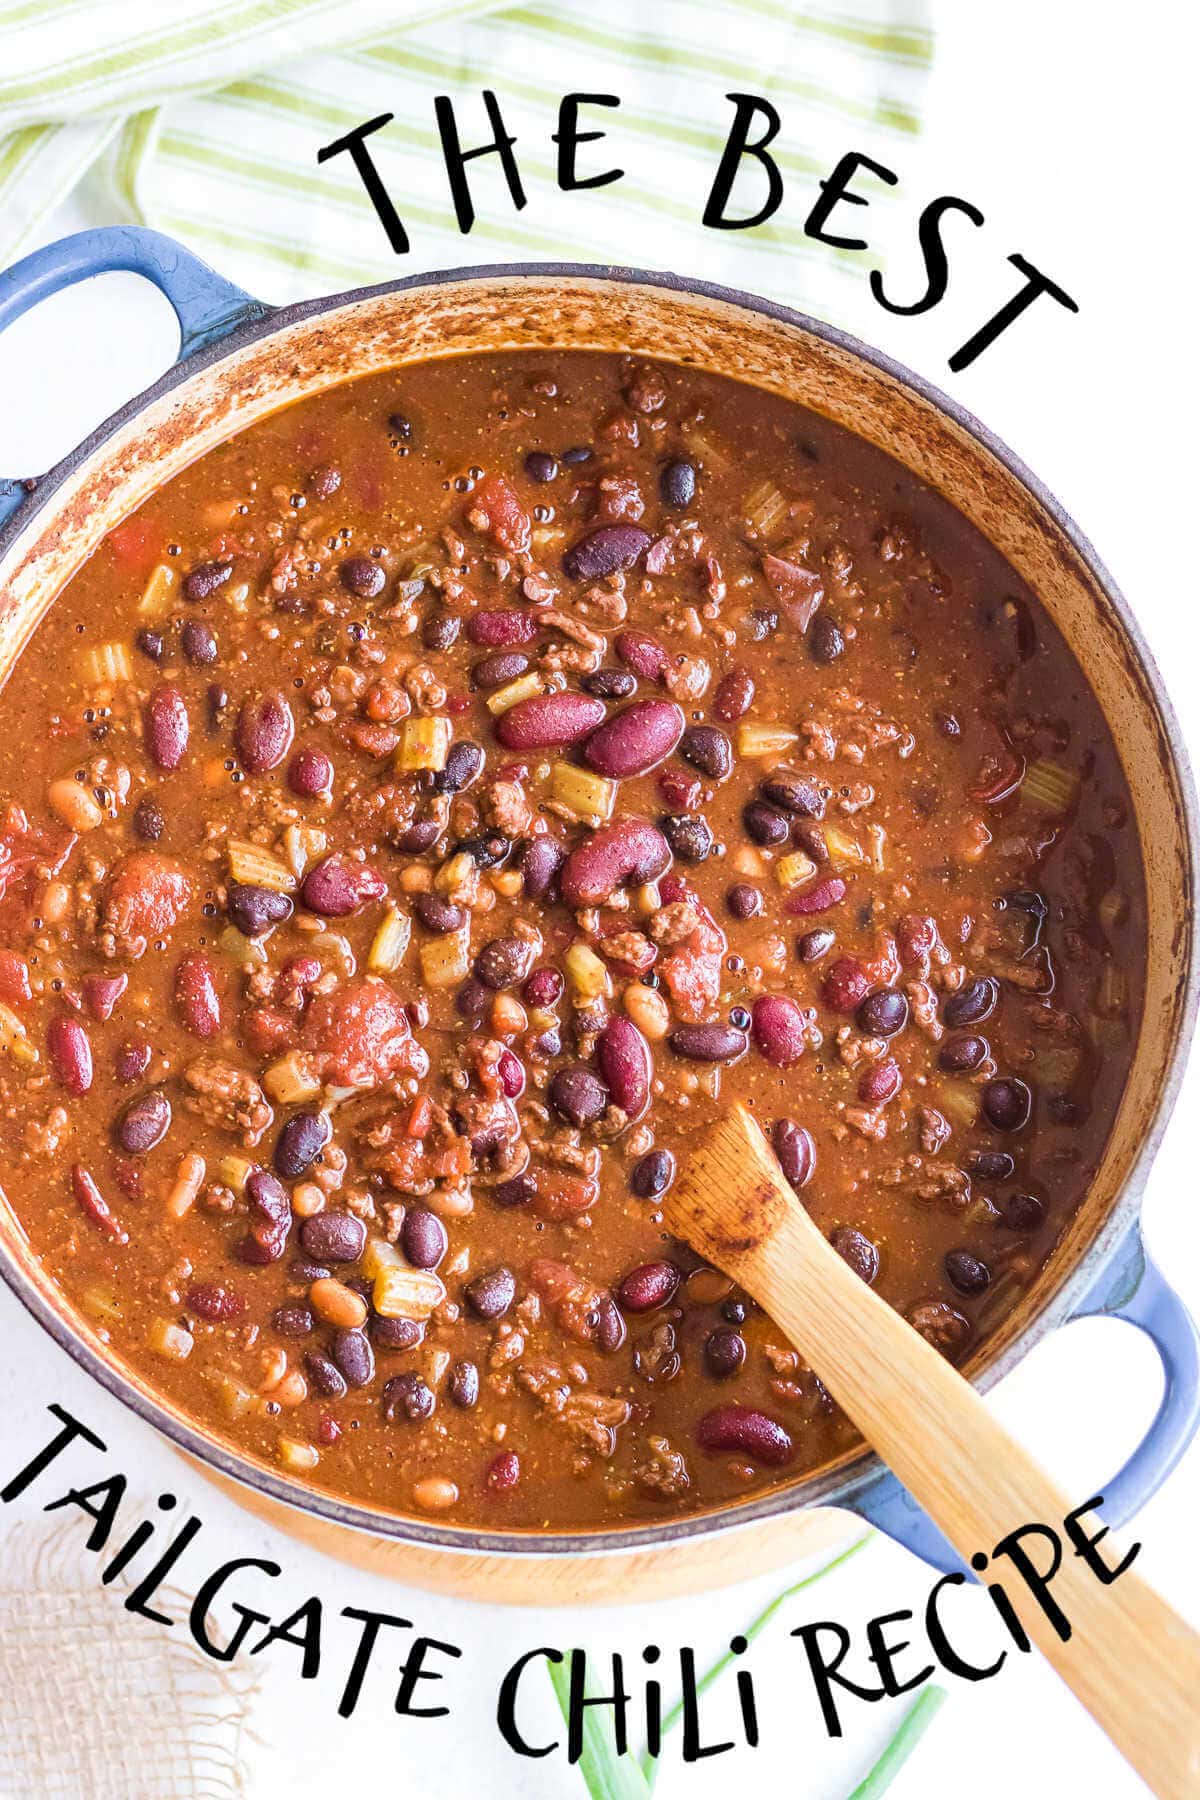 Overhead view of tailgate chili recipe in a pot. Title text overlay.